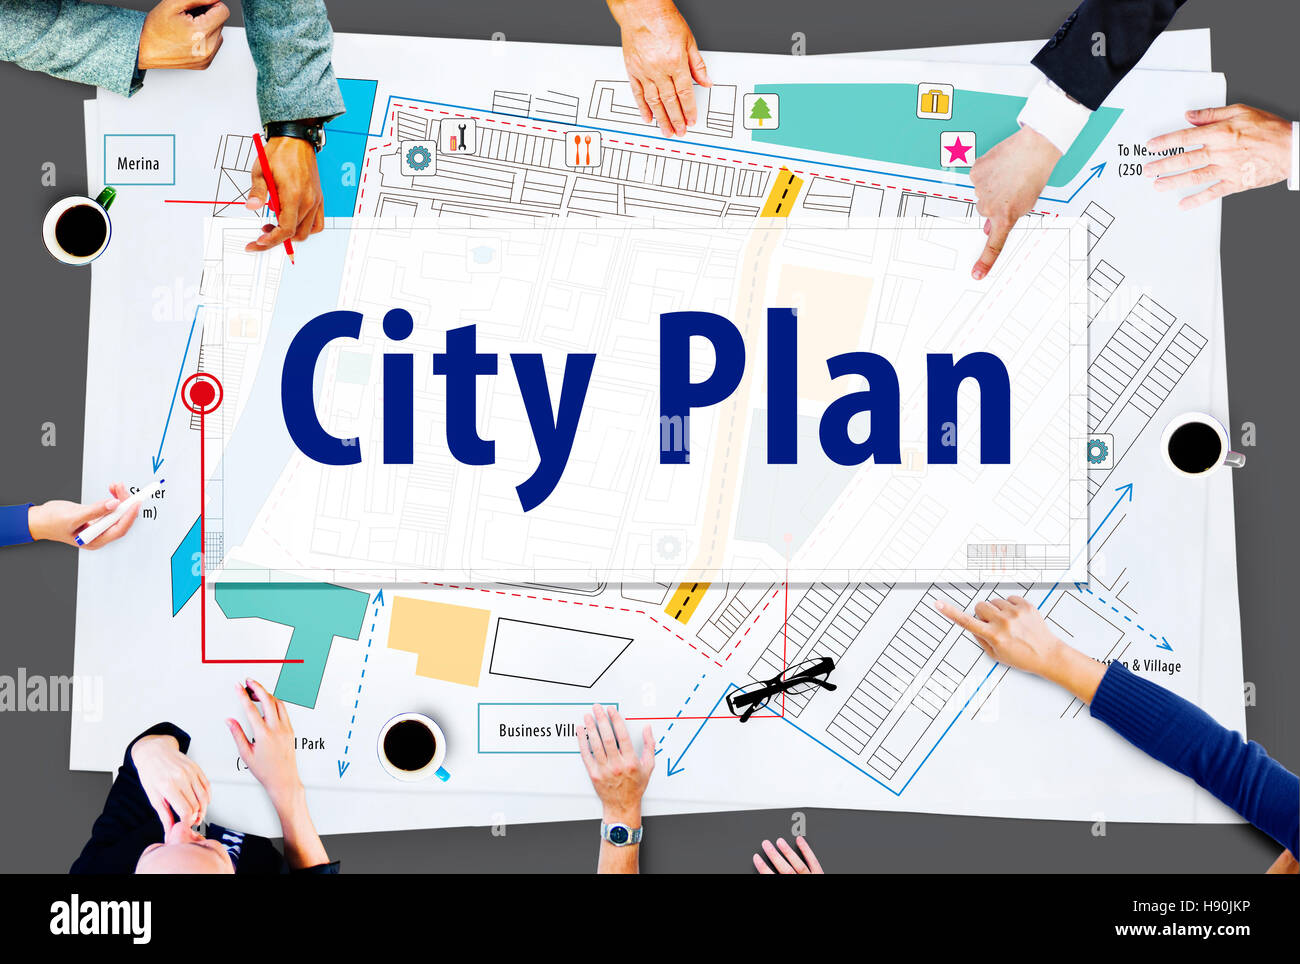 City Plan Architecture Engineering Planning Concept Stock Photo